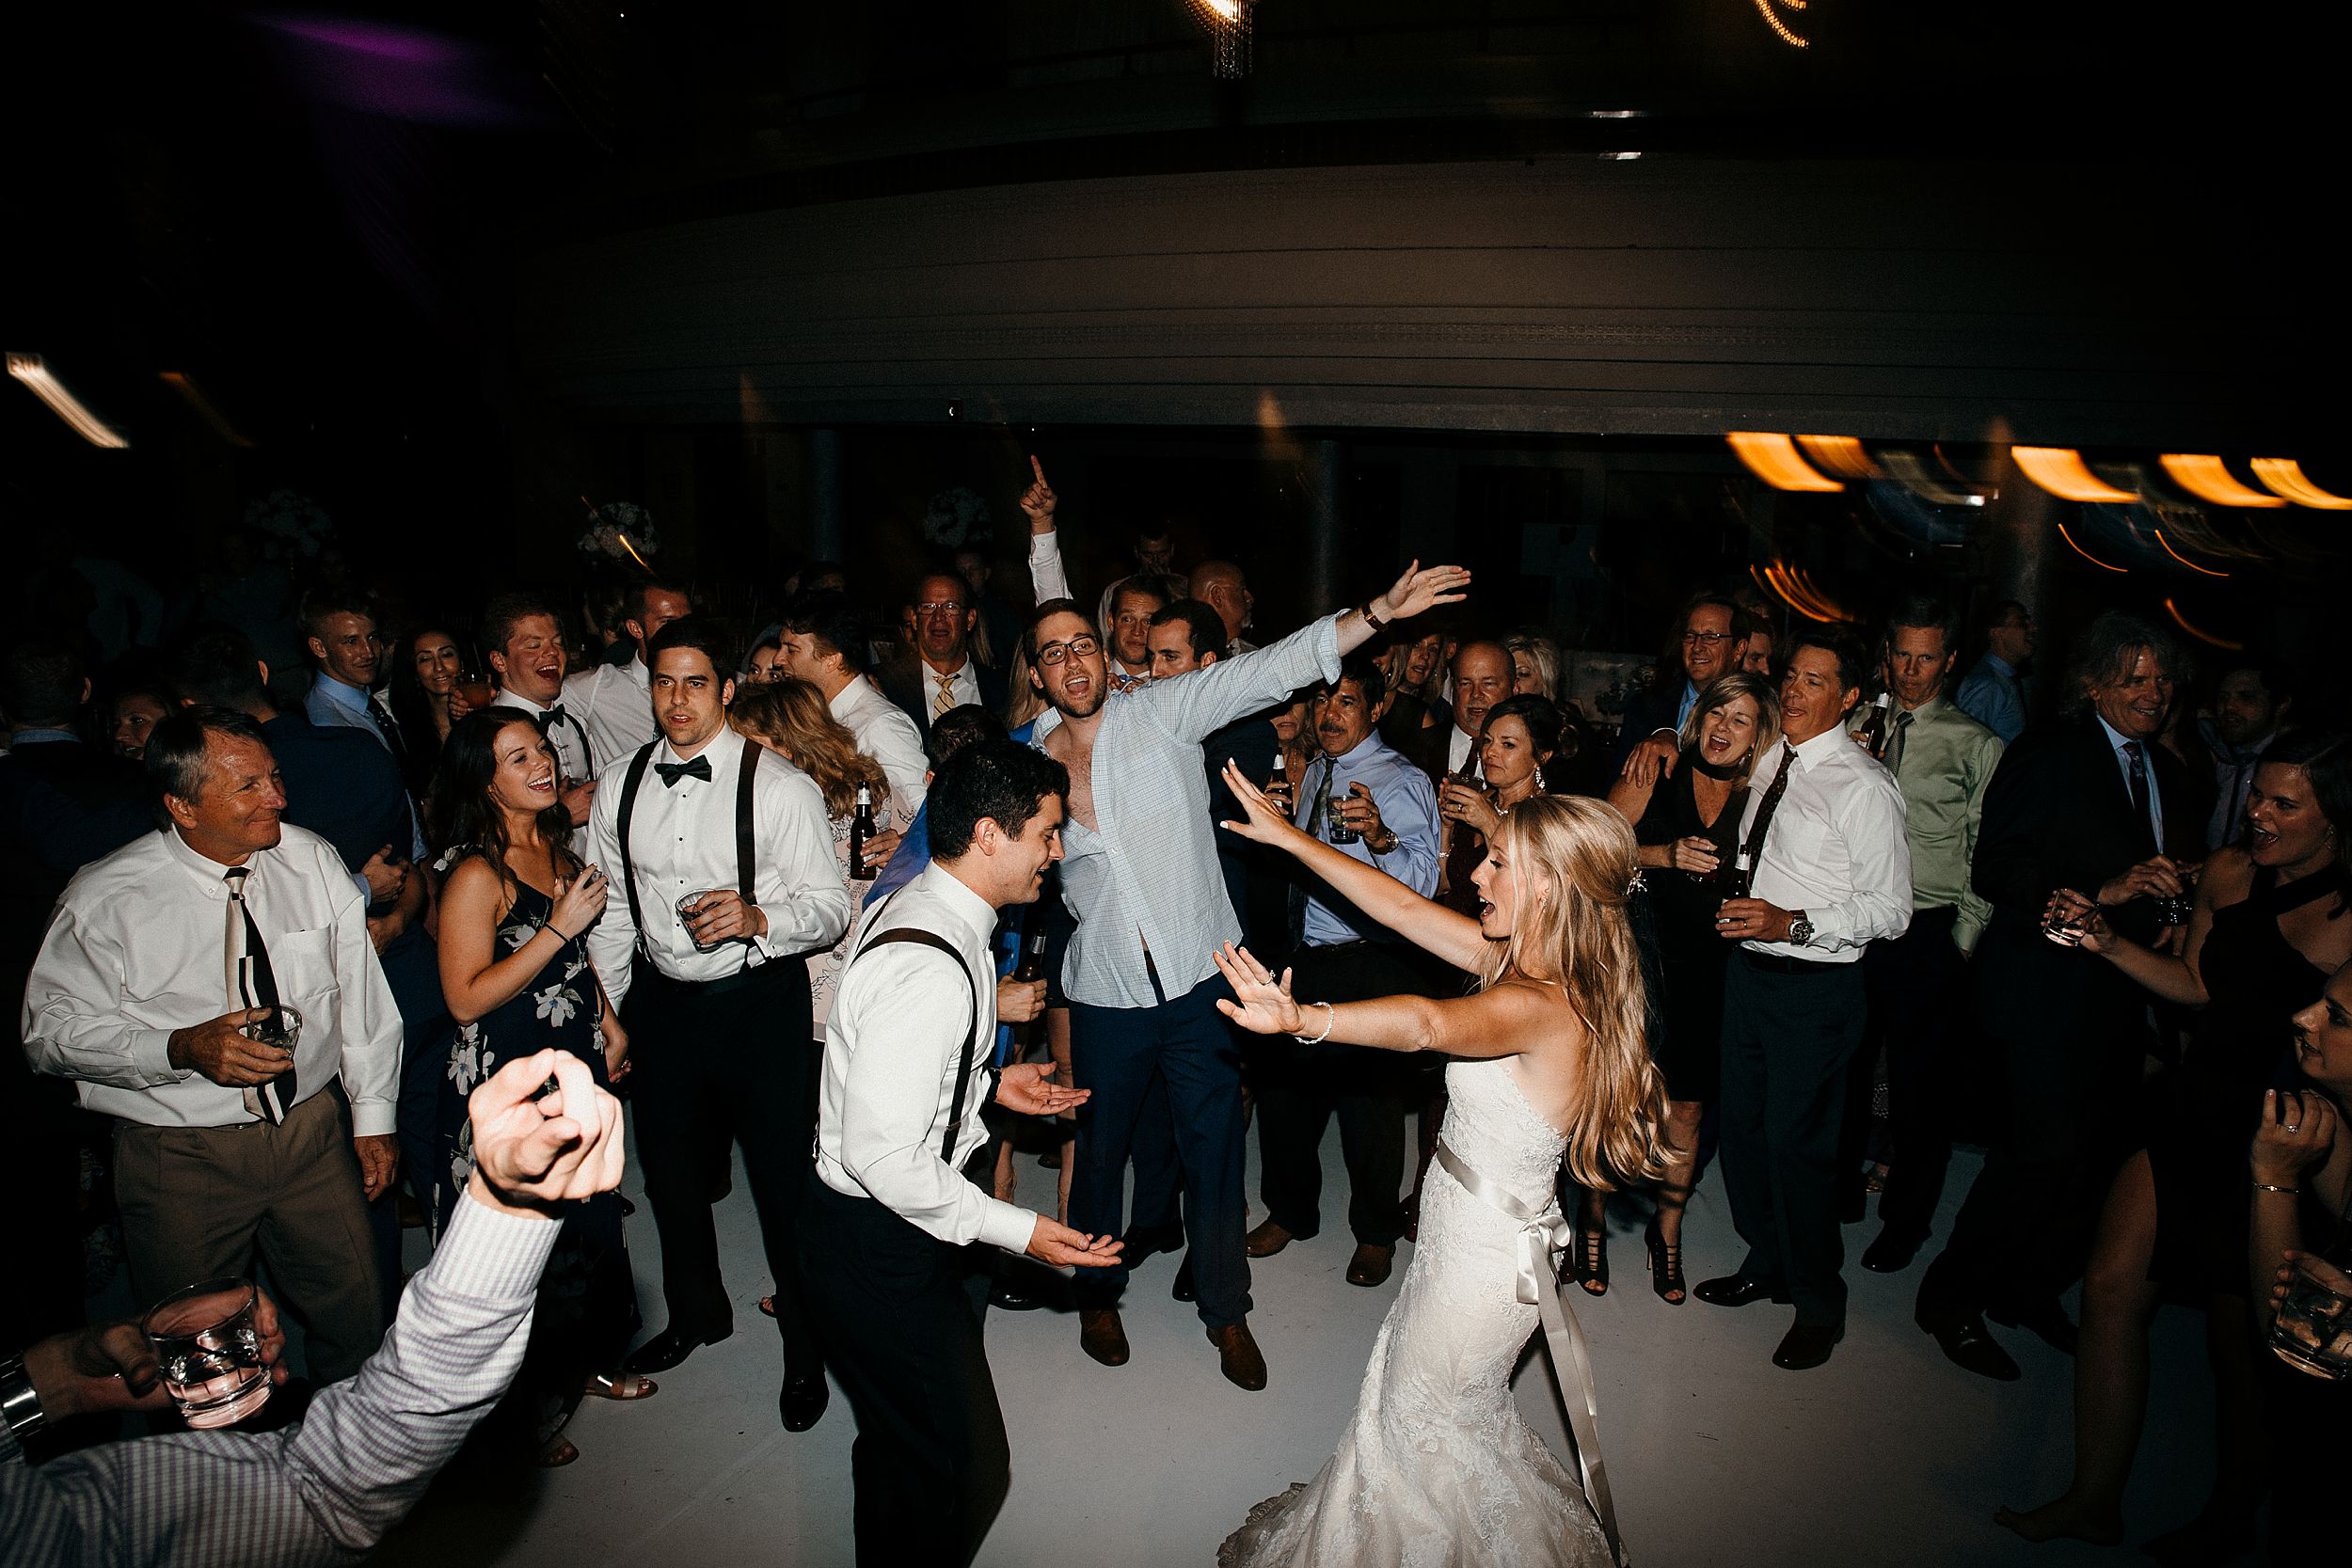 Images from the Dance Floor at Weddings